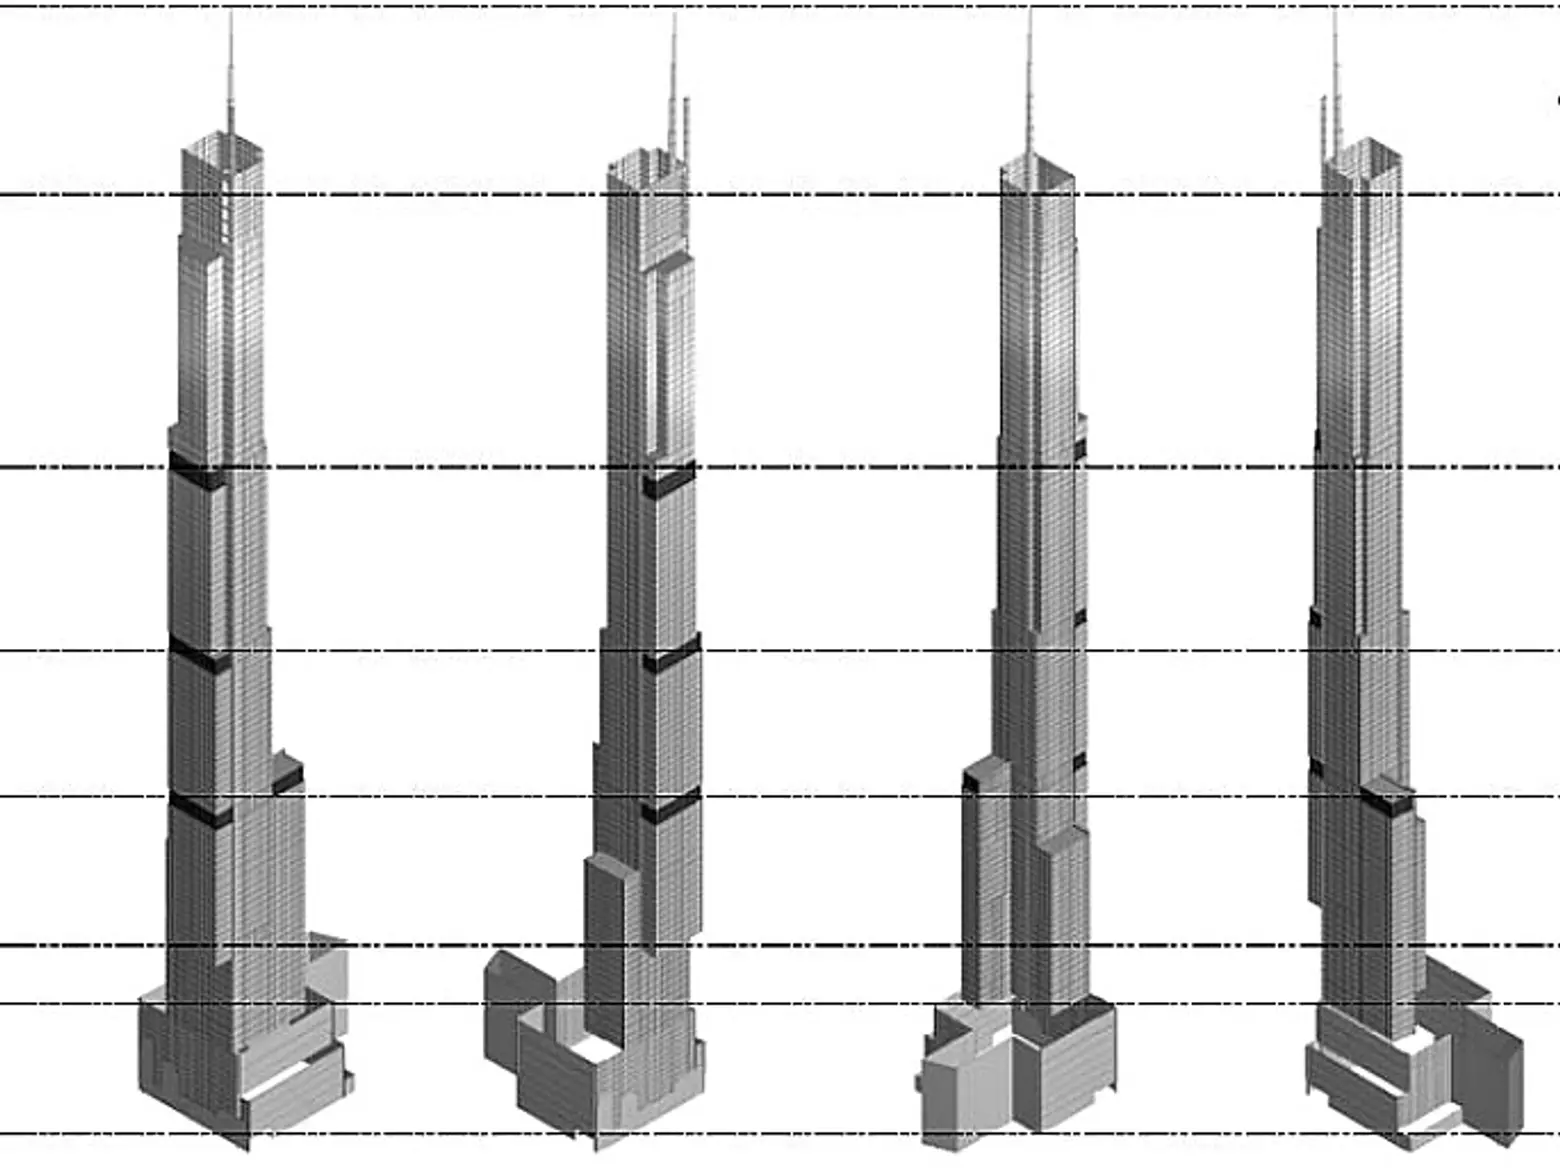 Extell’s Nordstrom Tower Will Be Just a Foot Shorter Than One World Trade at 1,775 Feet